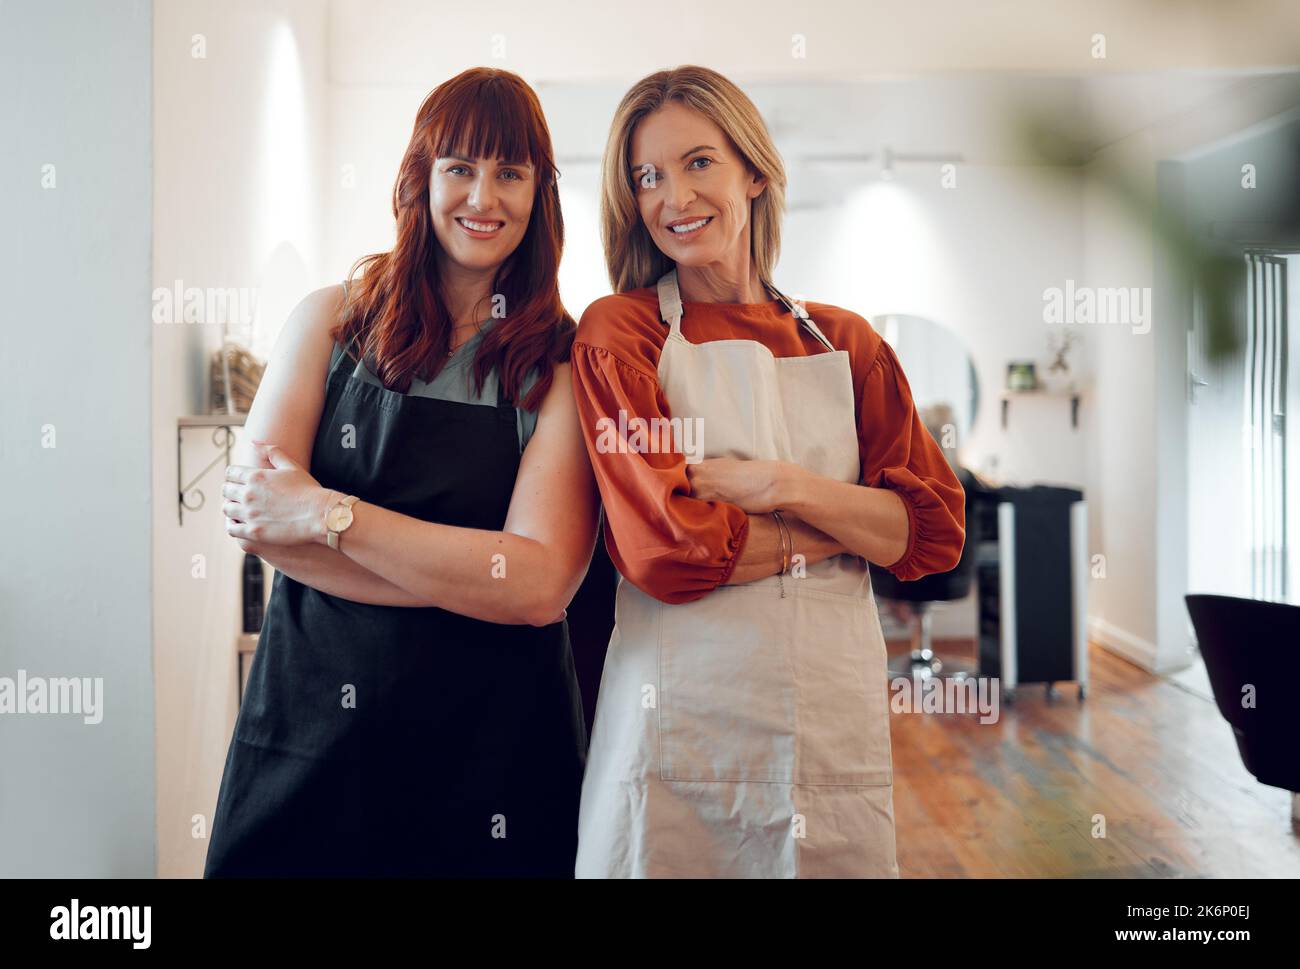 Hair salon, friends and portrait of happy hairdressers standing in their small business together. Happiness, smile and professional women hairstylists Stock Photo